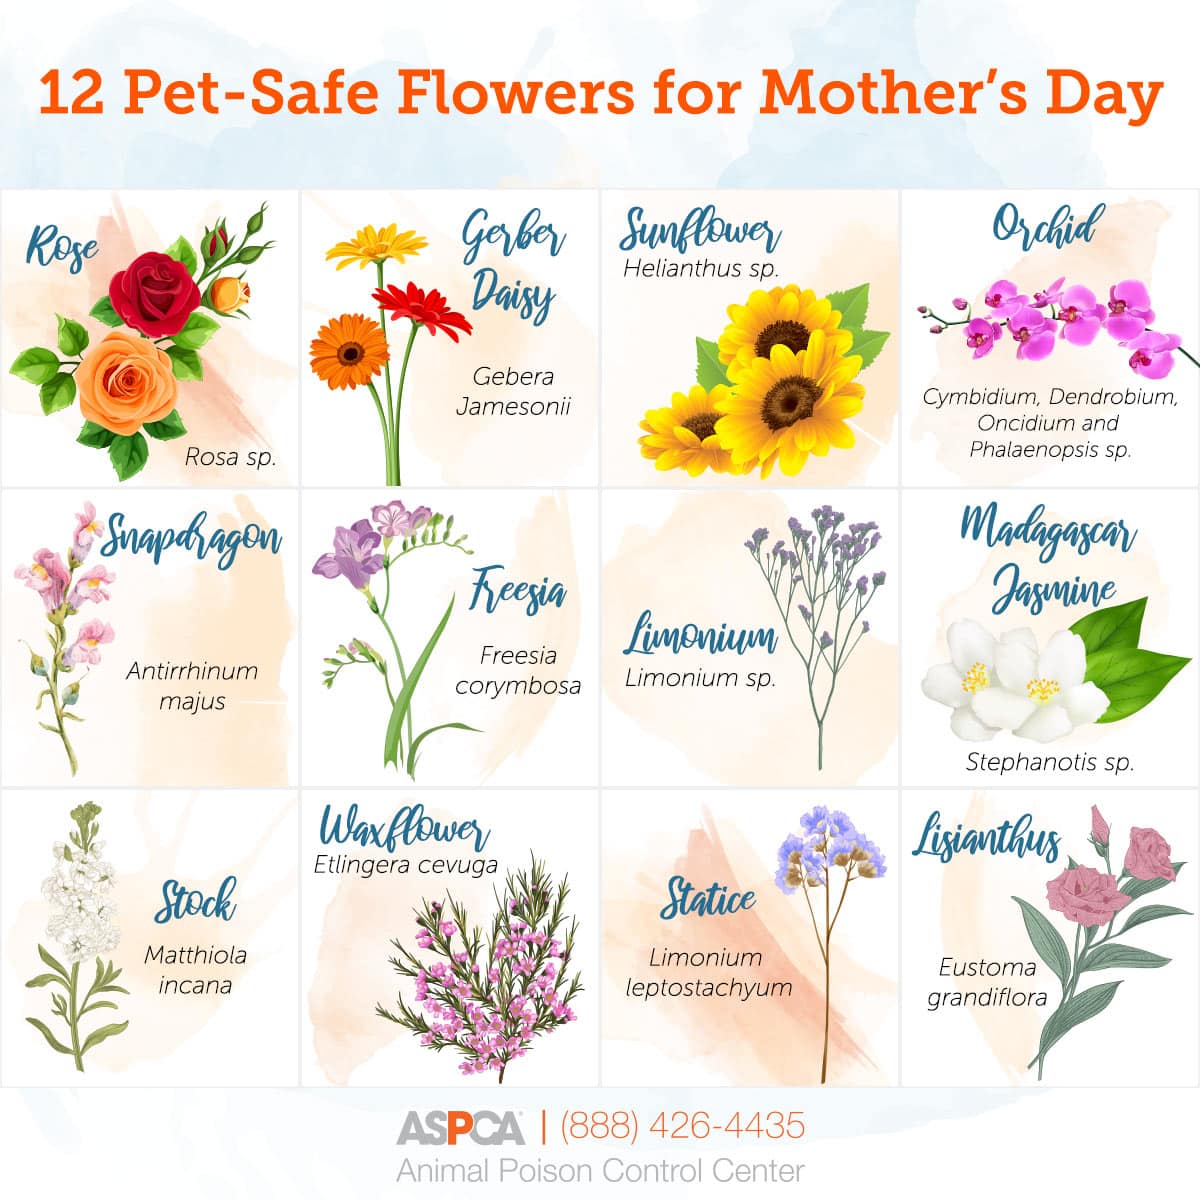 Mothers Day Bouquets: Whats Safe for Pets?